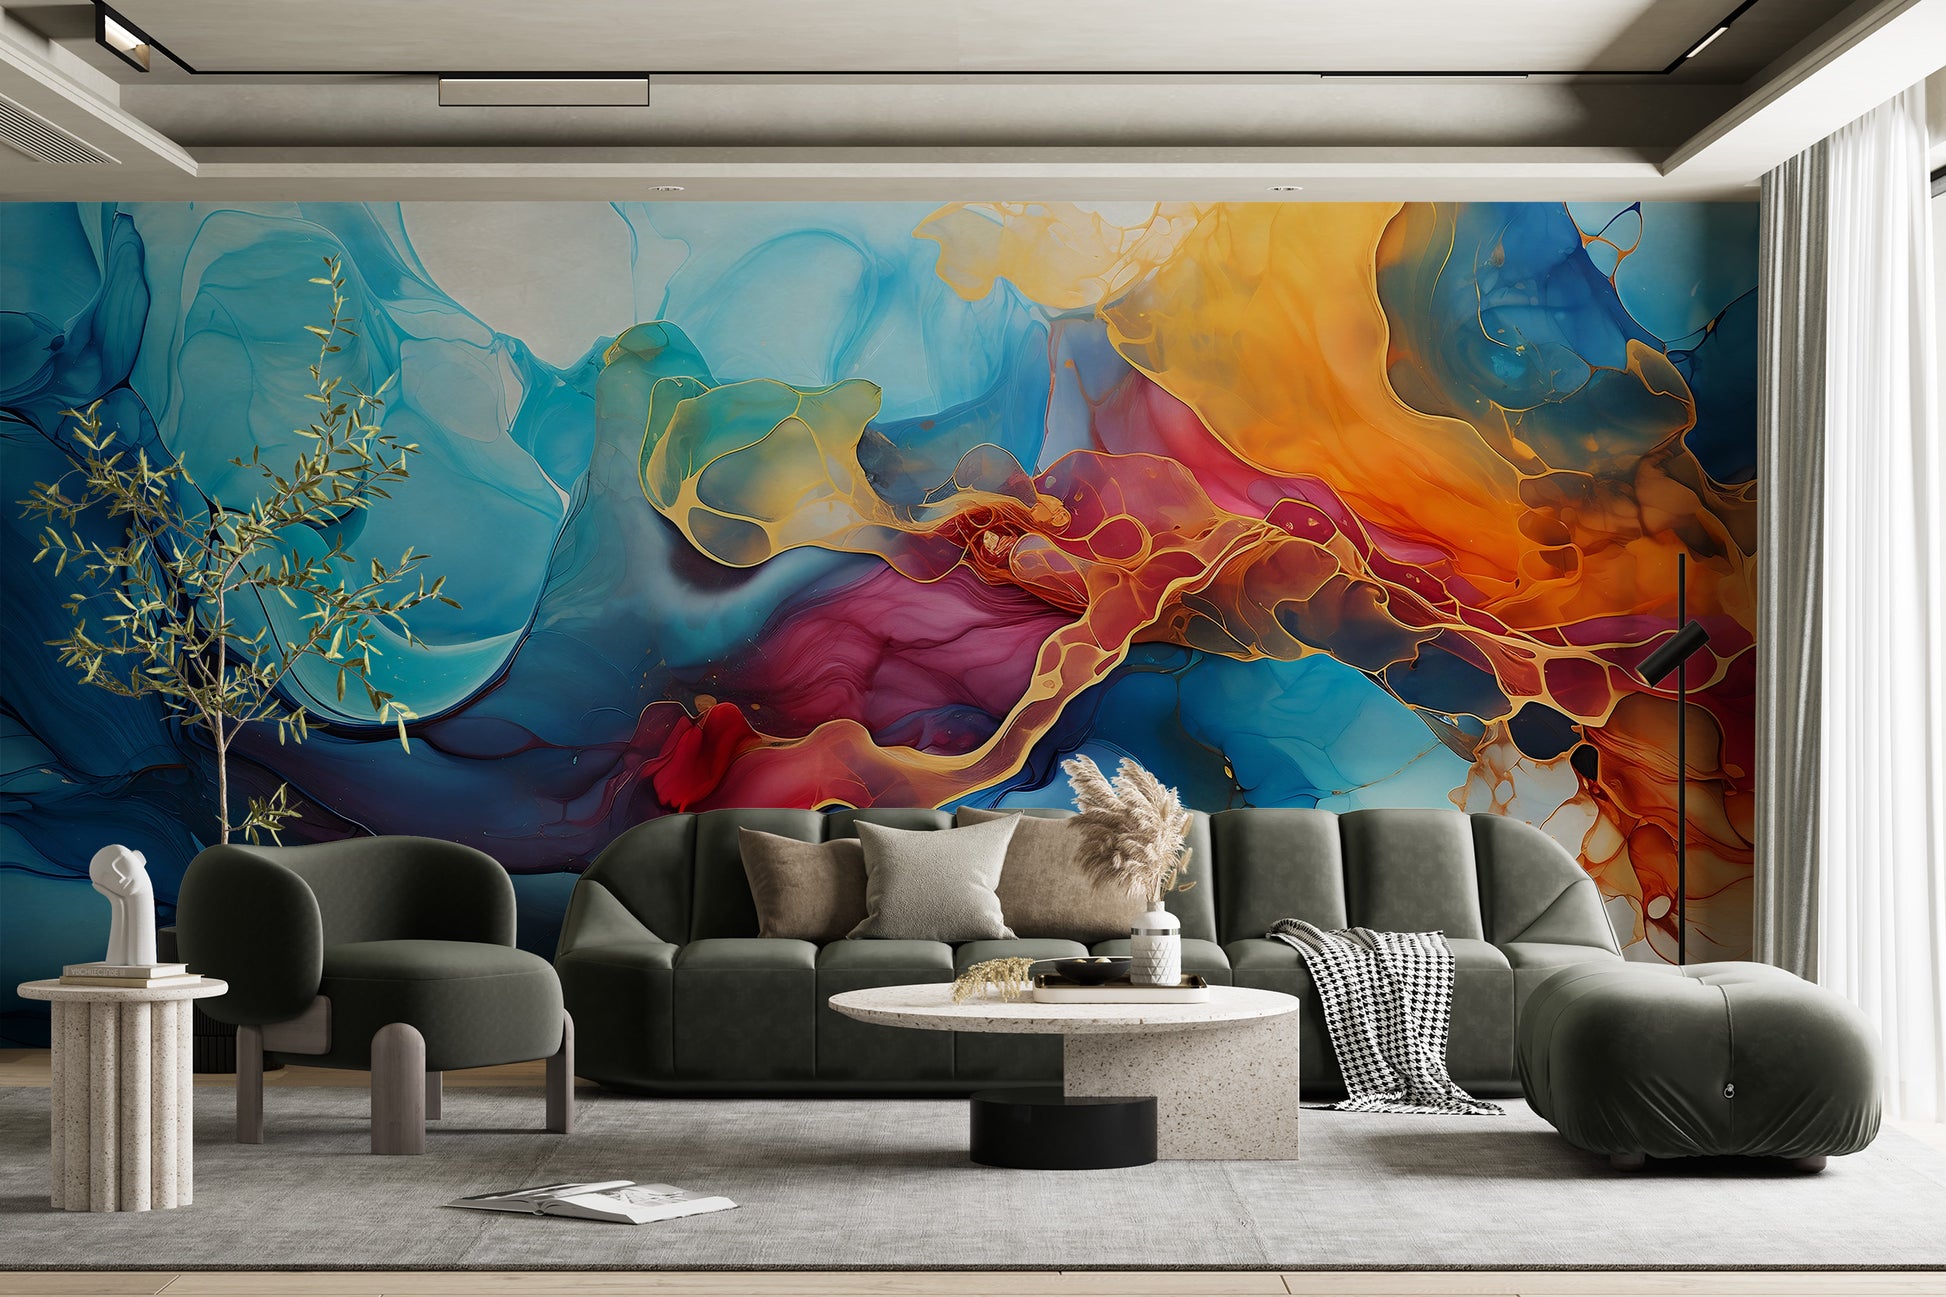 Stylish and Eco Friendly Wall Decor with Watercolor Abstract Patterns